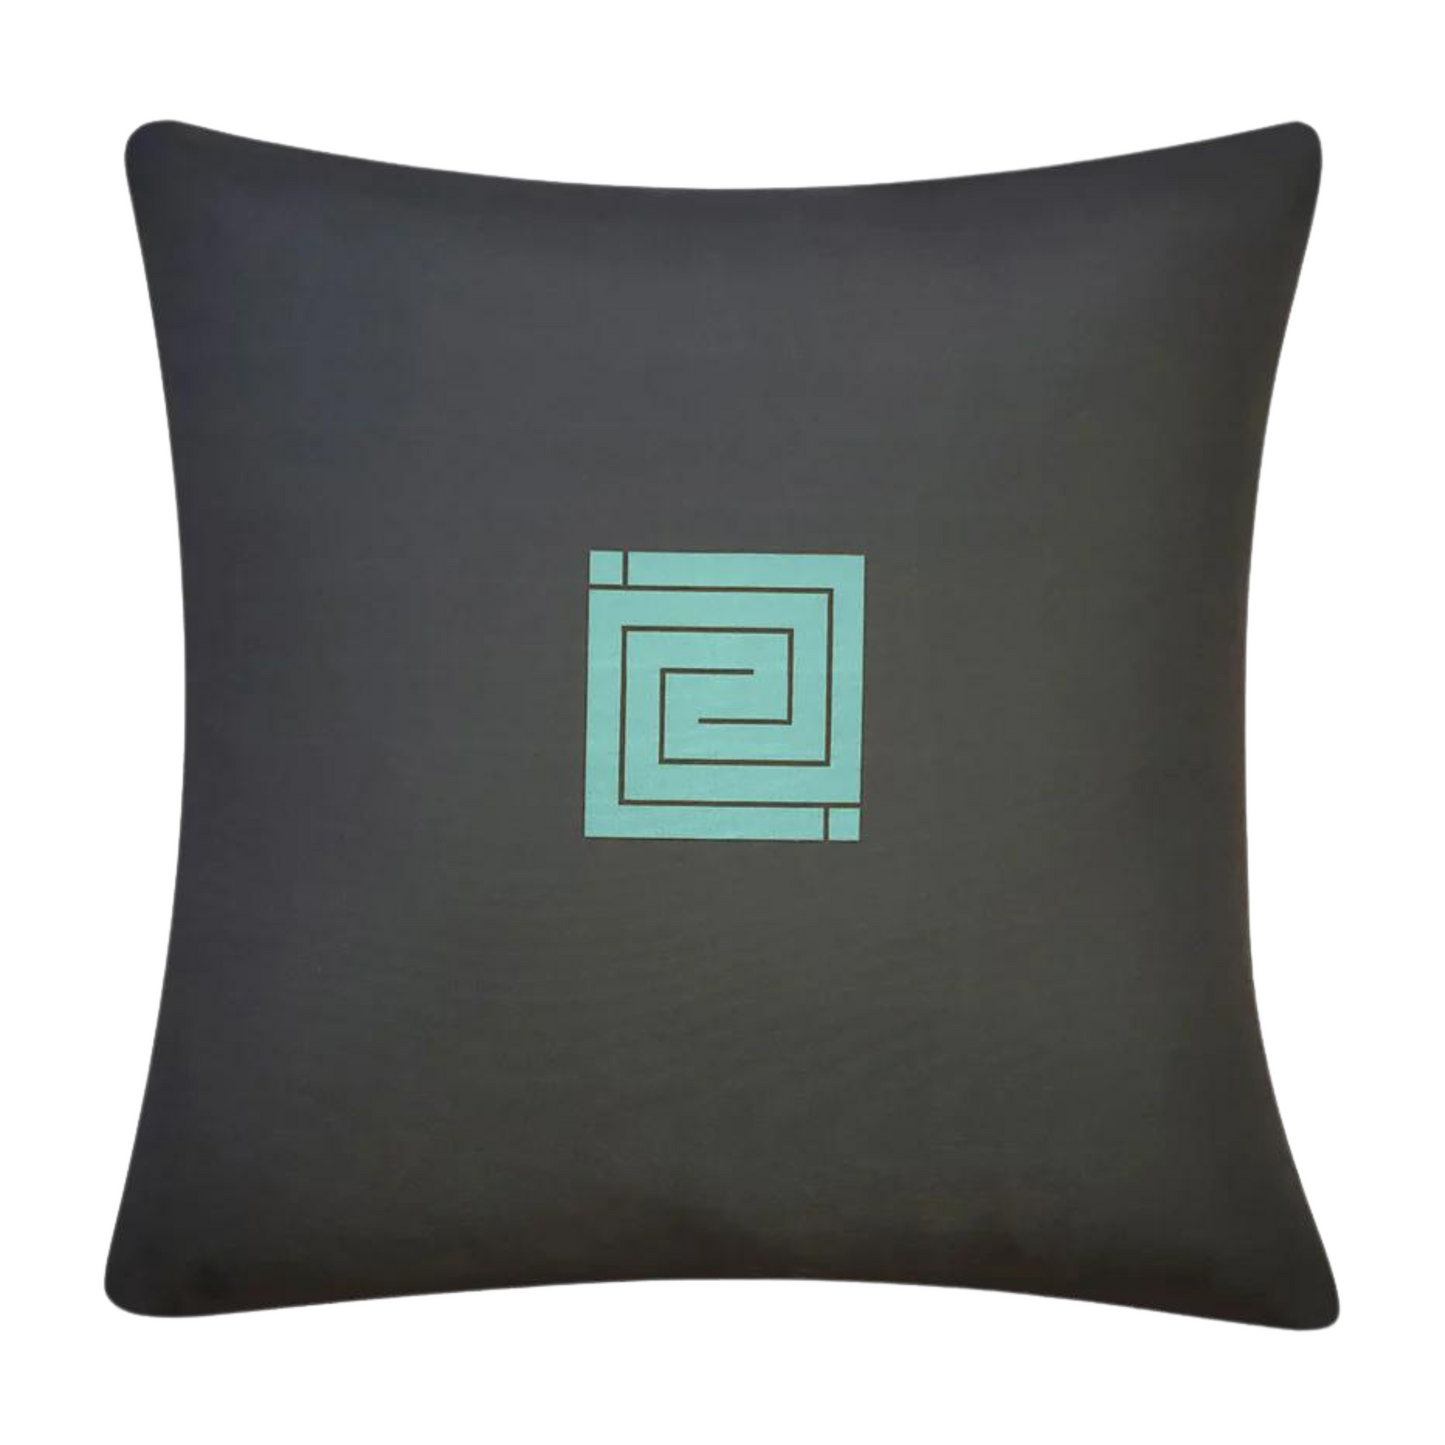 Pillow Cover - Whirling Arrow Teal